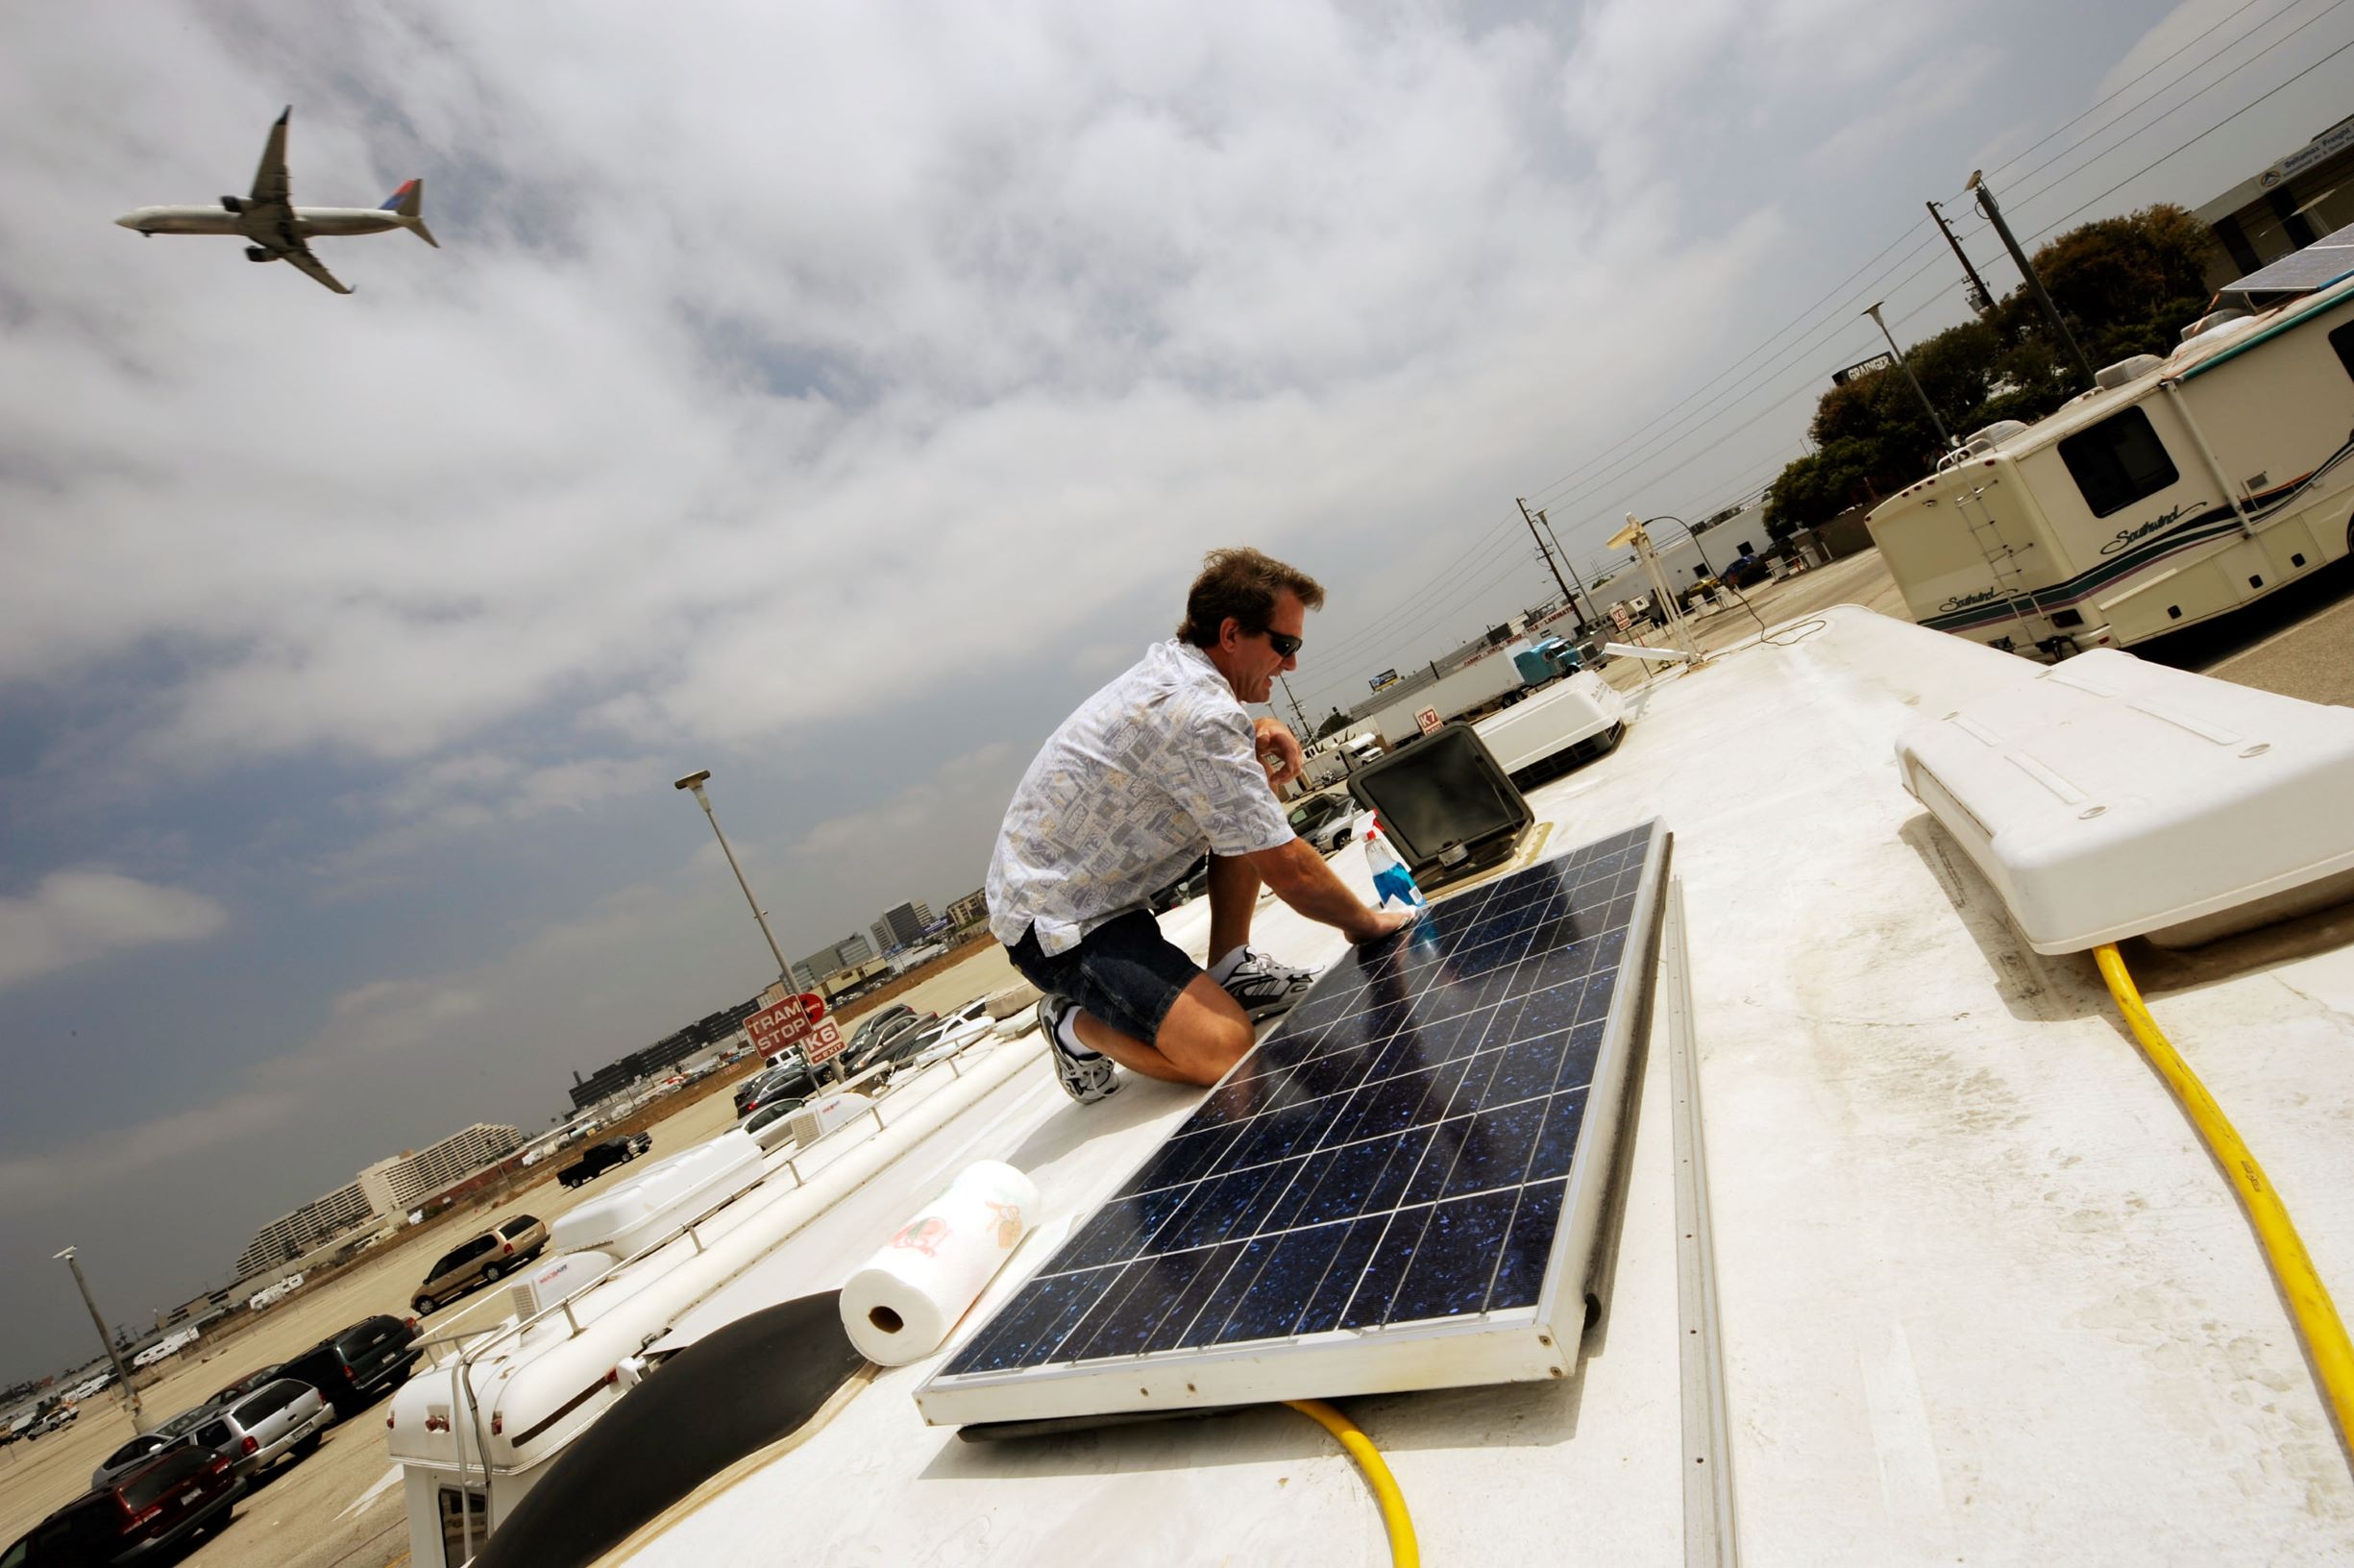 An aircraft mechanic does maintenance work on his RV's solar panels